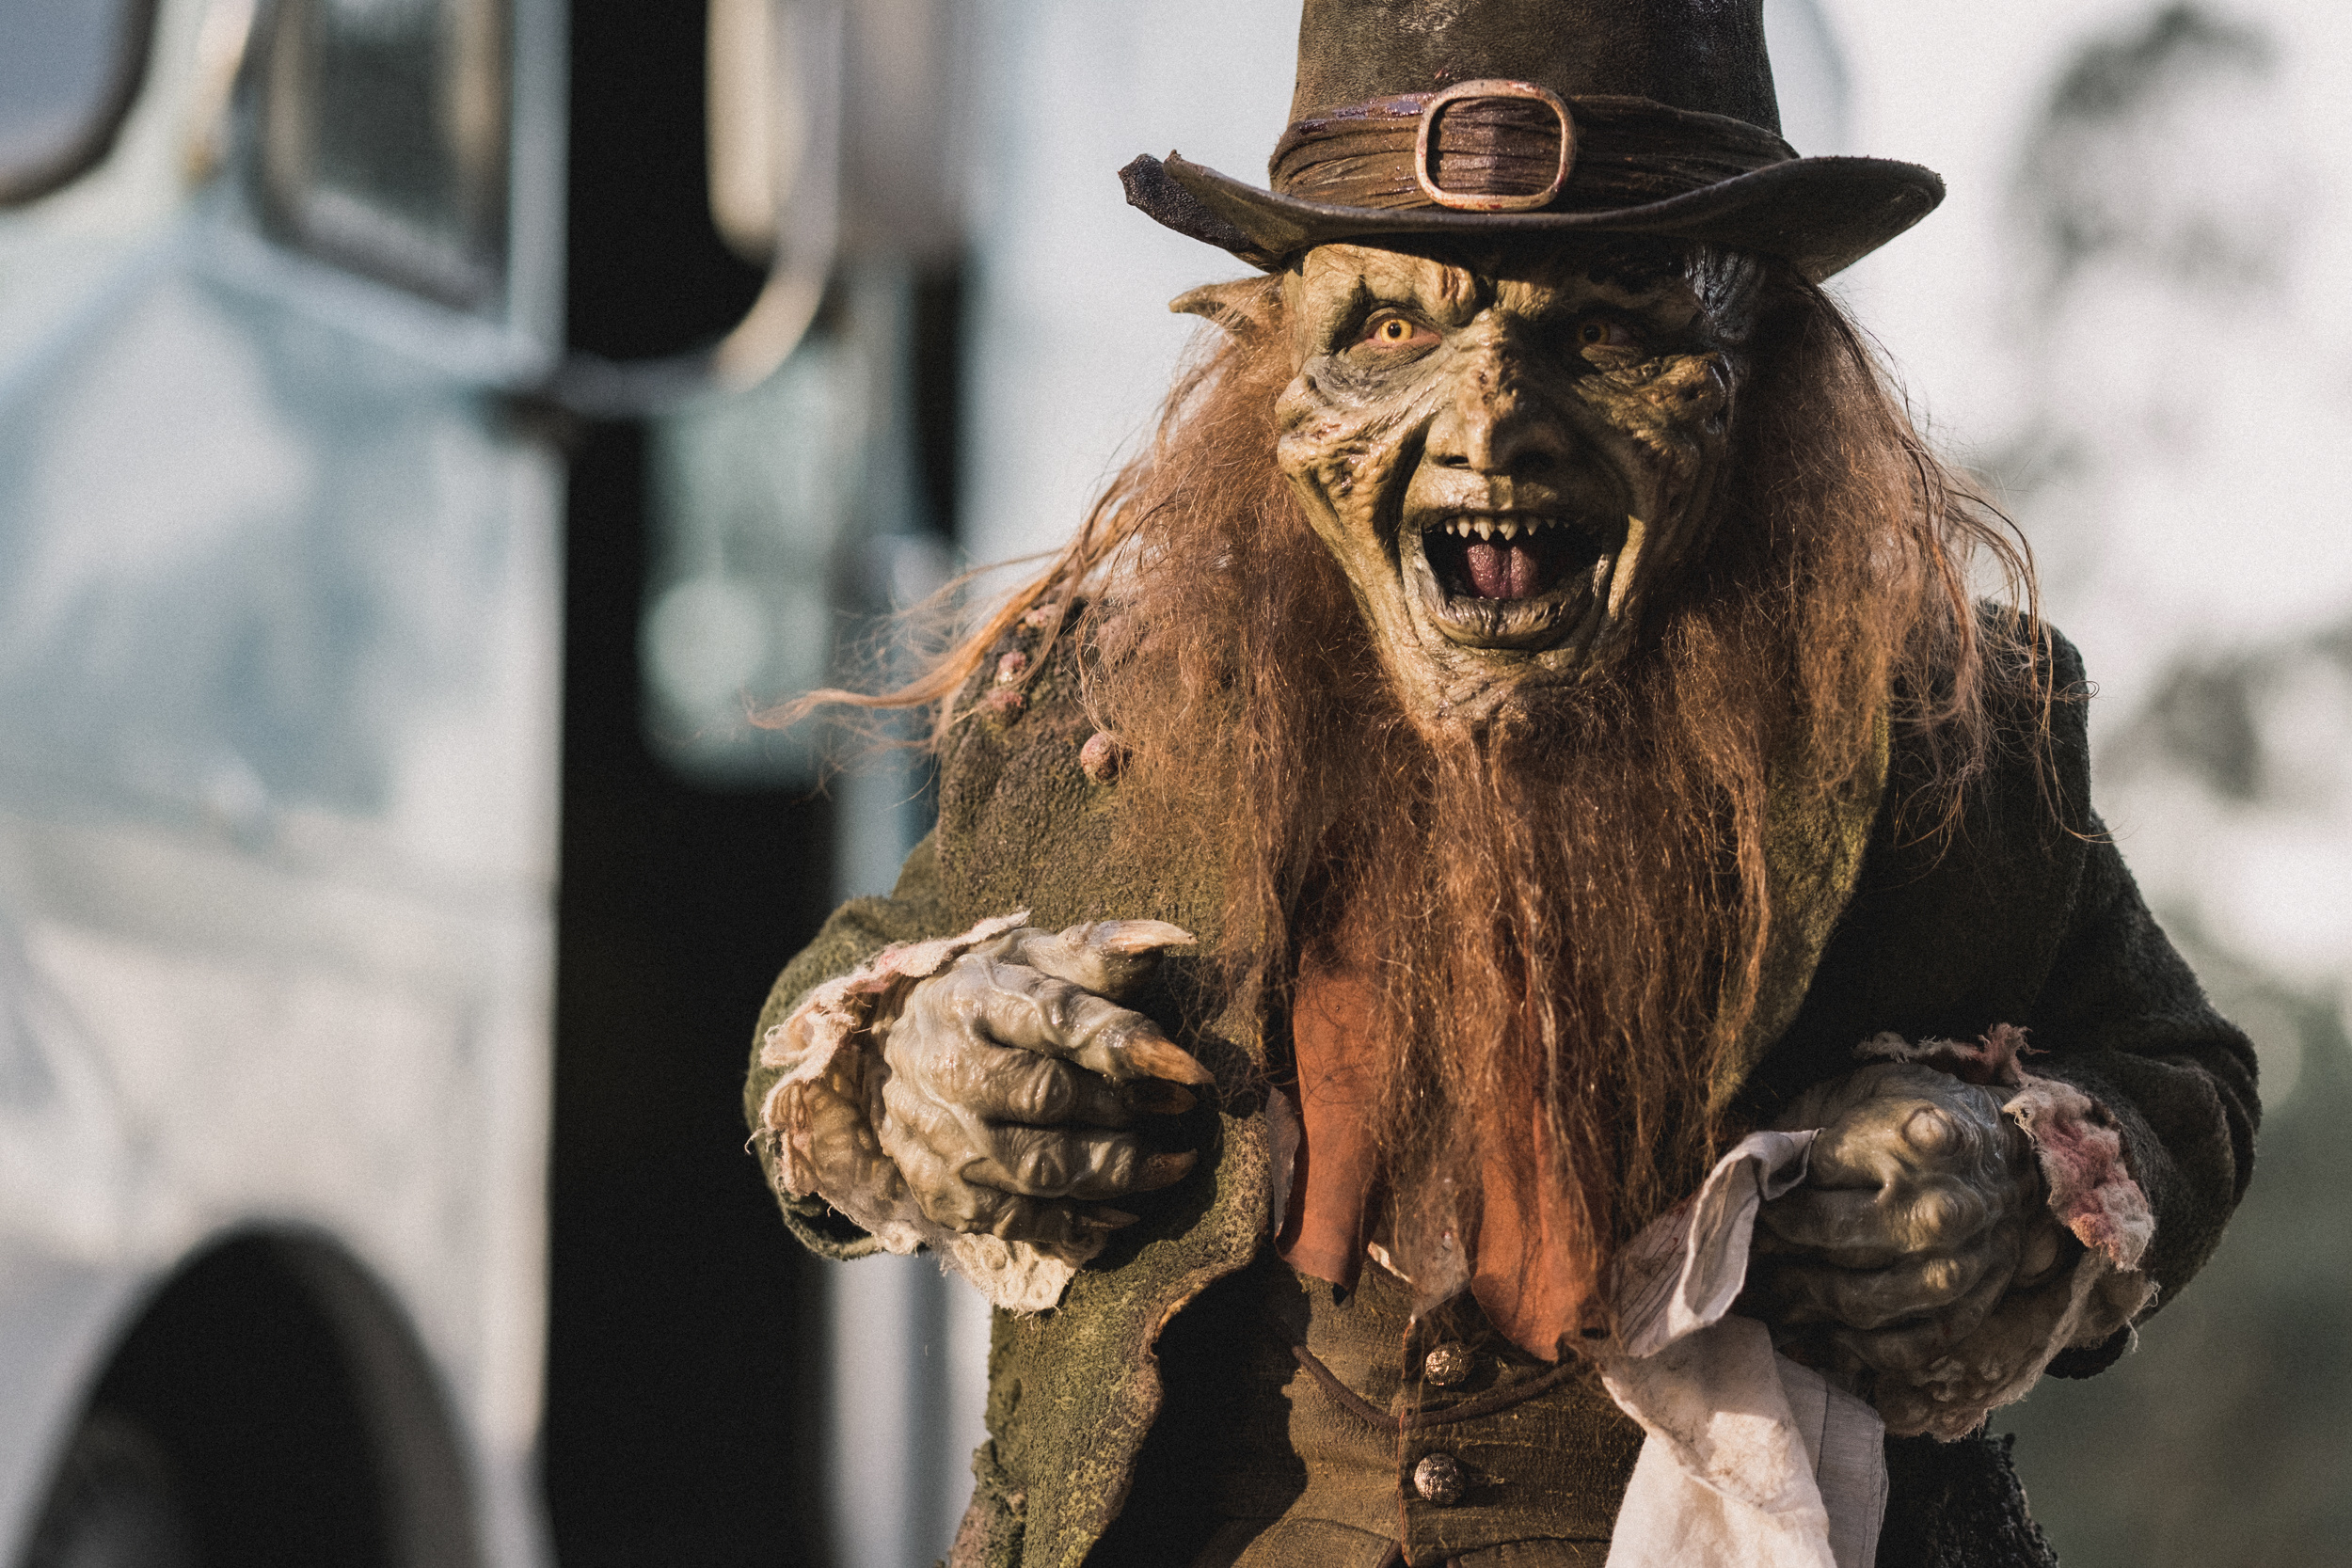 <p>The 2018 horror movie <em>Leprechaun Returns</em> (the eighth film in the franchise) takes place almost entirely in a sorority house at the fictional Laramore University. (Although the house is way, way off campus.) It’s one of only two Leprechaun movies not to feature Warwick Davis in the titular role and was generally panned by critics for having a lot of gore and not much else…but that’s all we need. We love every <em>Leprechaun</em> installment, and so do a lot of fans of silly, brainless horror — the movie’s 72% rating on Rotten Tomatoes backs that up.</p><p>You may also like: <a href='https://www.yardbarker.com/entertainment/articles/20_facts_you_might_not_know_about_lord_of_the_rings_return_of_the_king/s1__38646244'>20 facts you might not know about 'Lord of the Rings: Return of the King'</a></p>